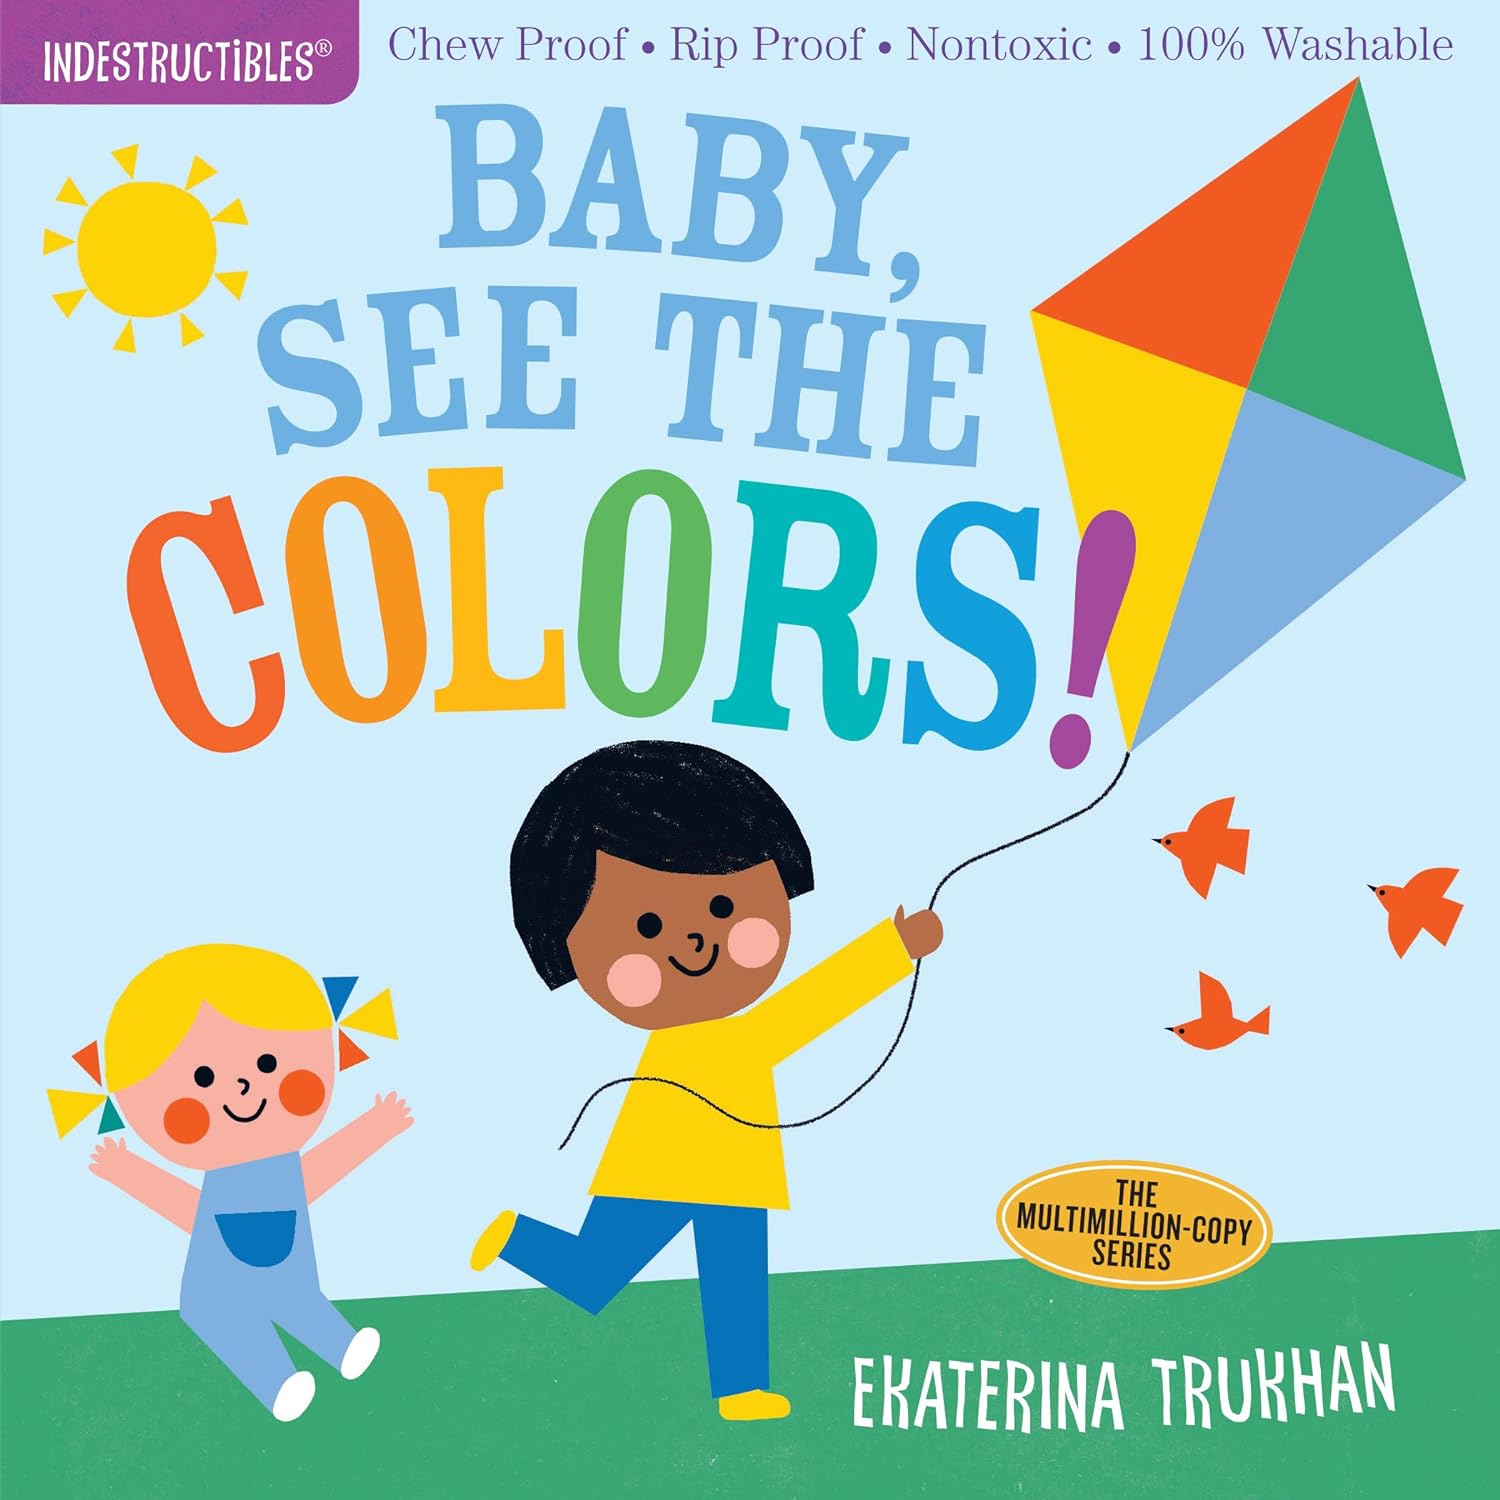 Indestructibles: Baby, See the Colors!-HACHETTE BOOK GROUP USA-Little Giant Kidz